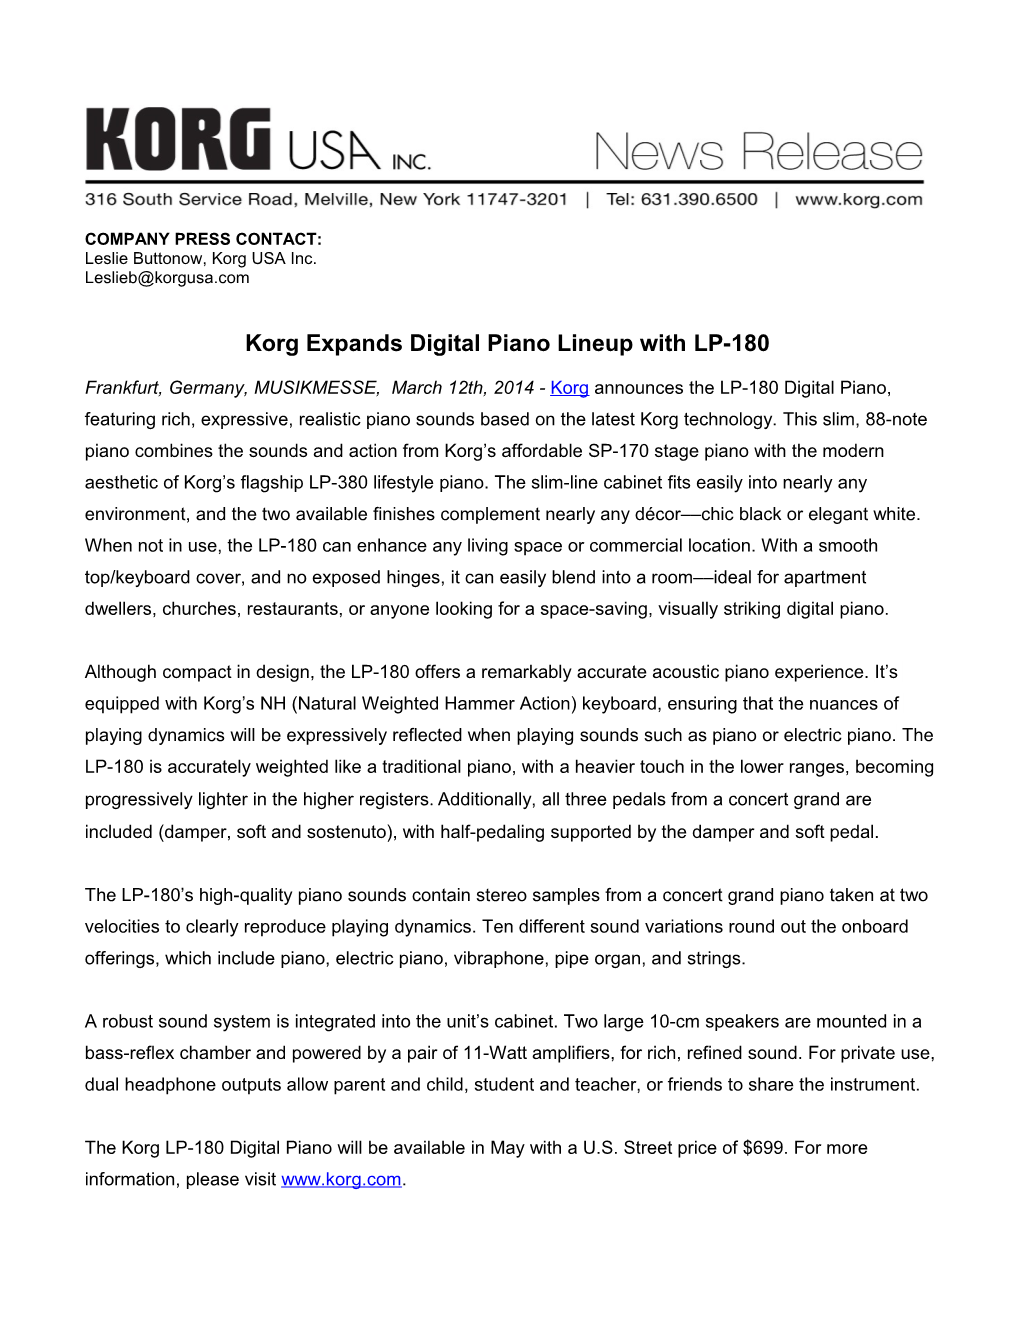 Korg Expands Digital Piano Lineup Withlp-180